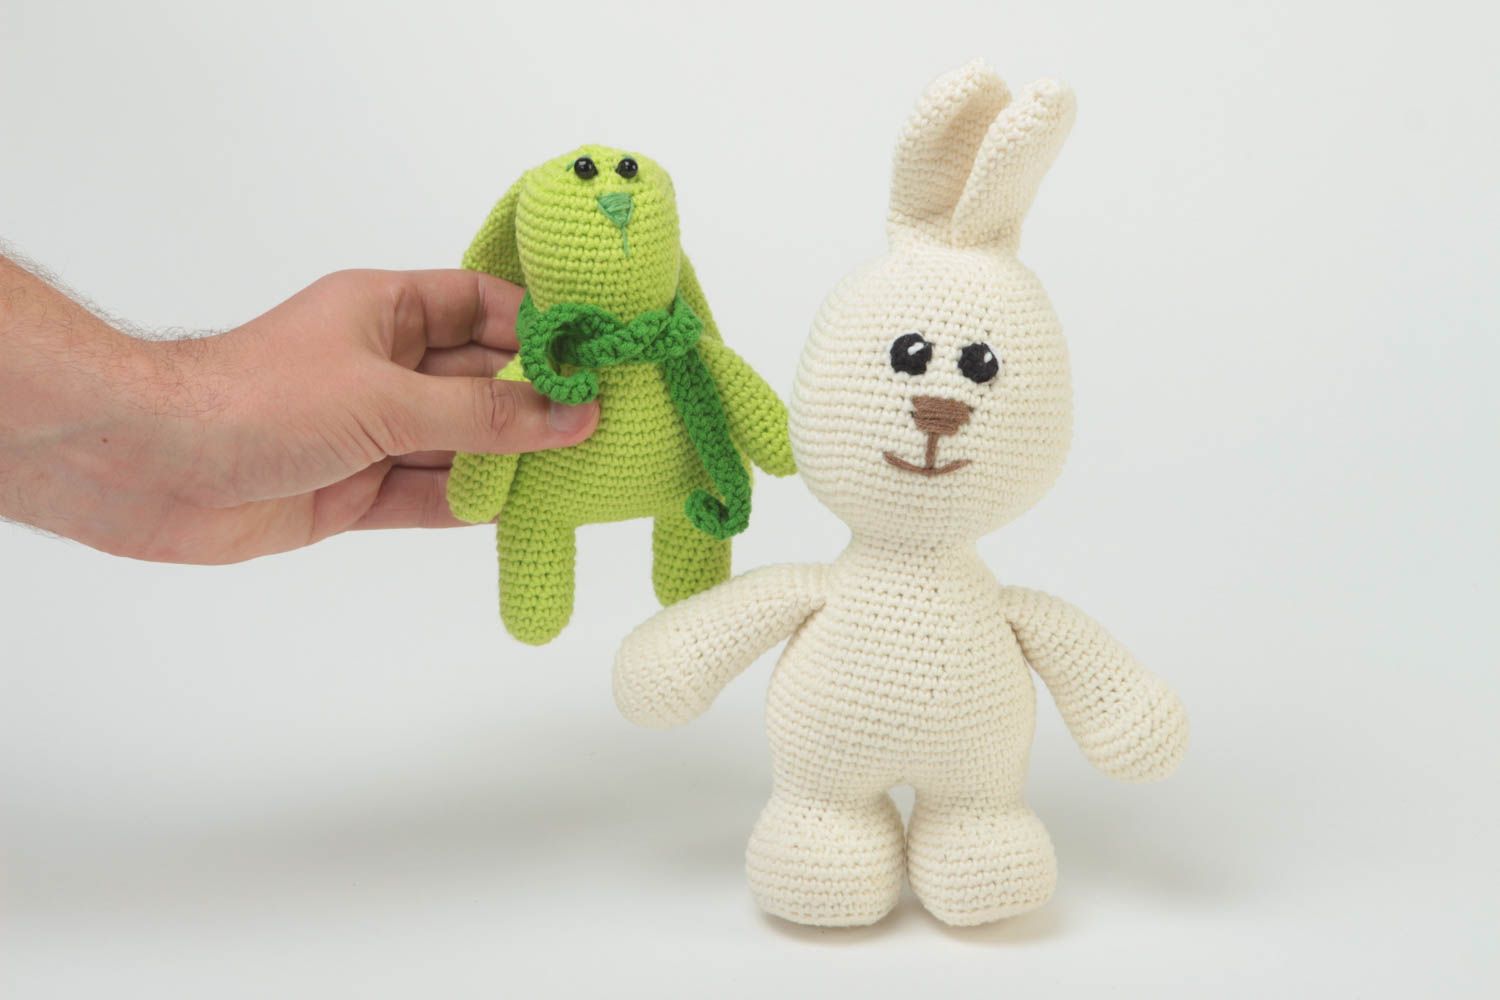 Beautiful handmade soft toy crochet toy 2 pieces best toys for kids gift ideas photo 5